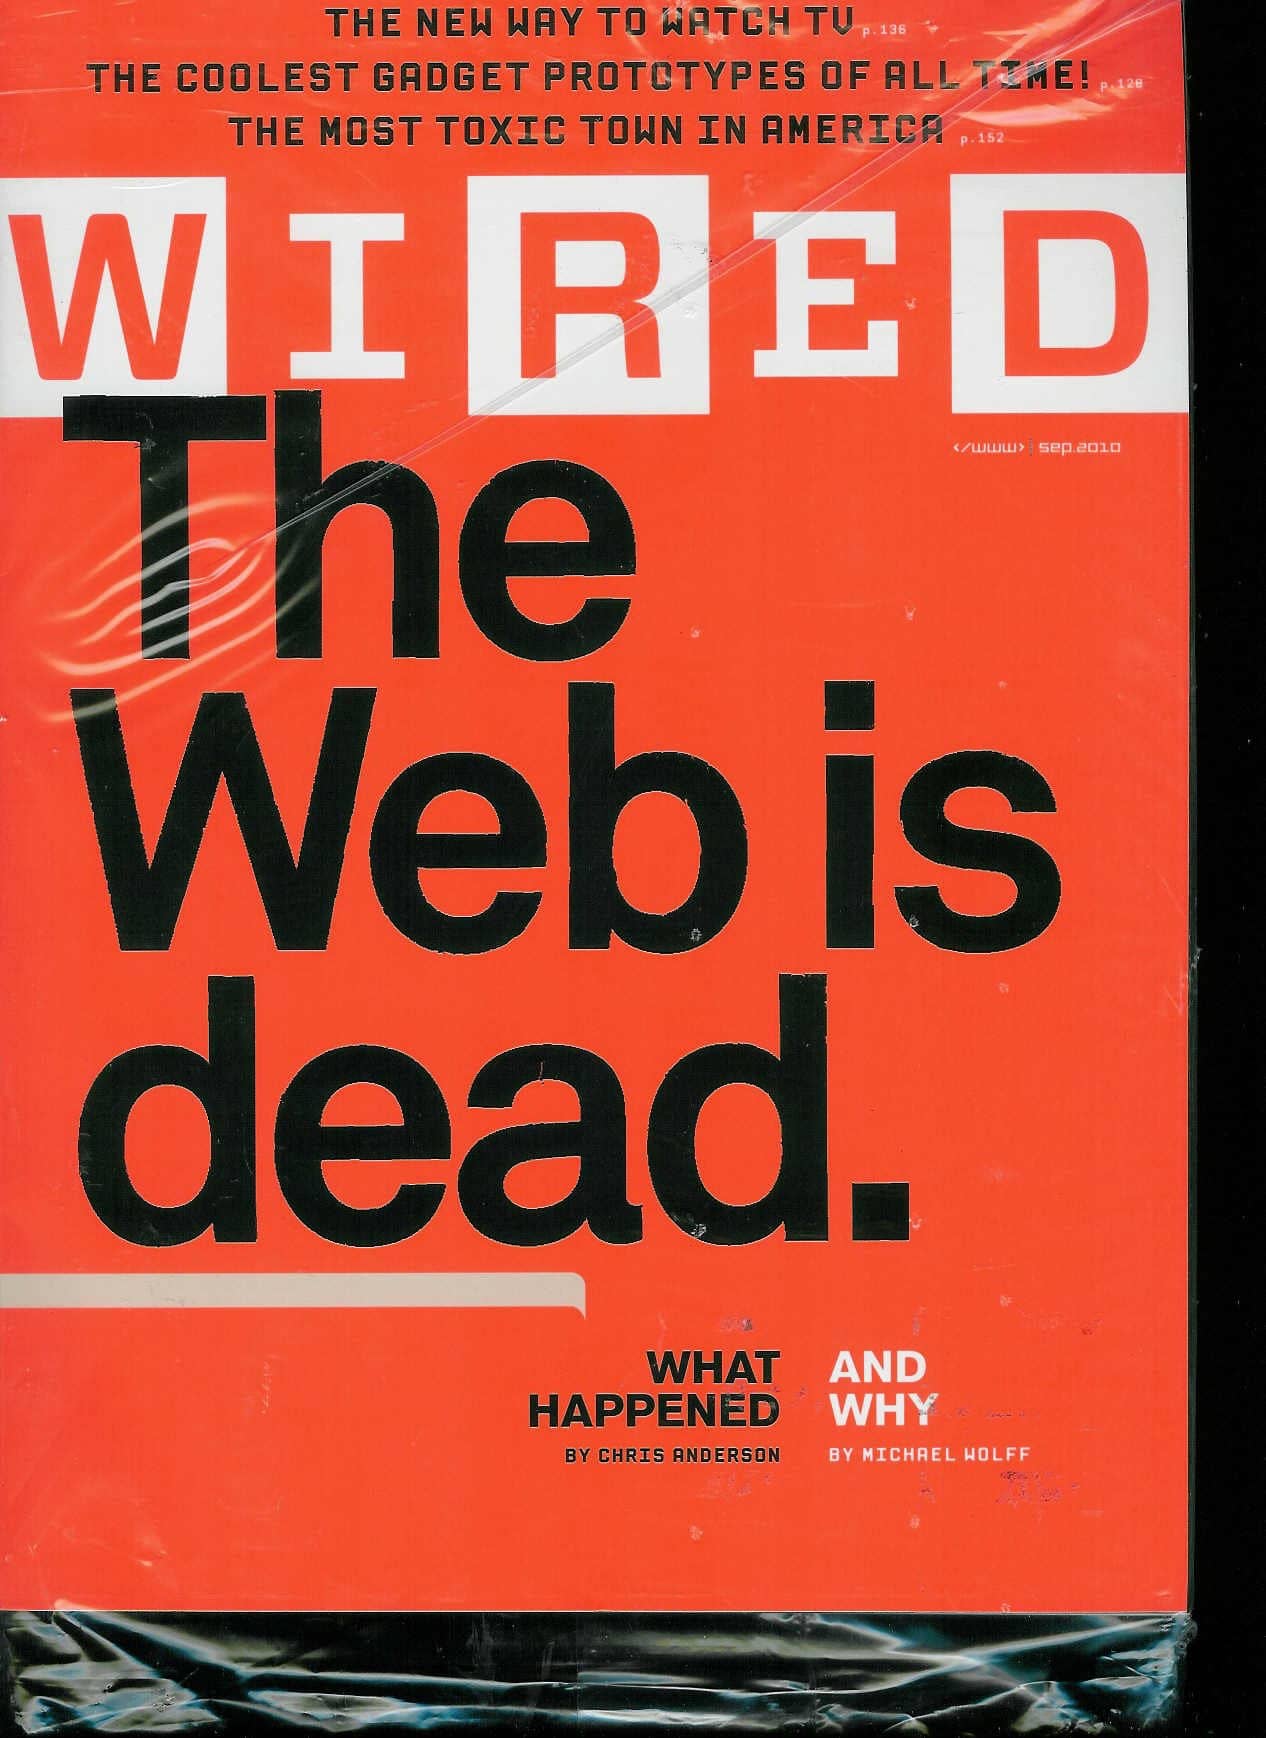 Wired was so wrong about the Internet